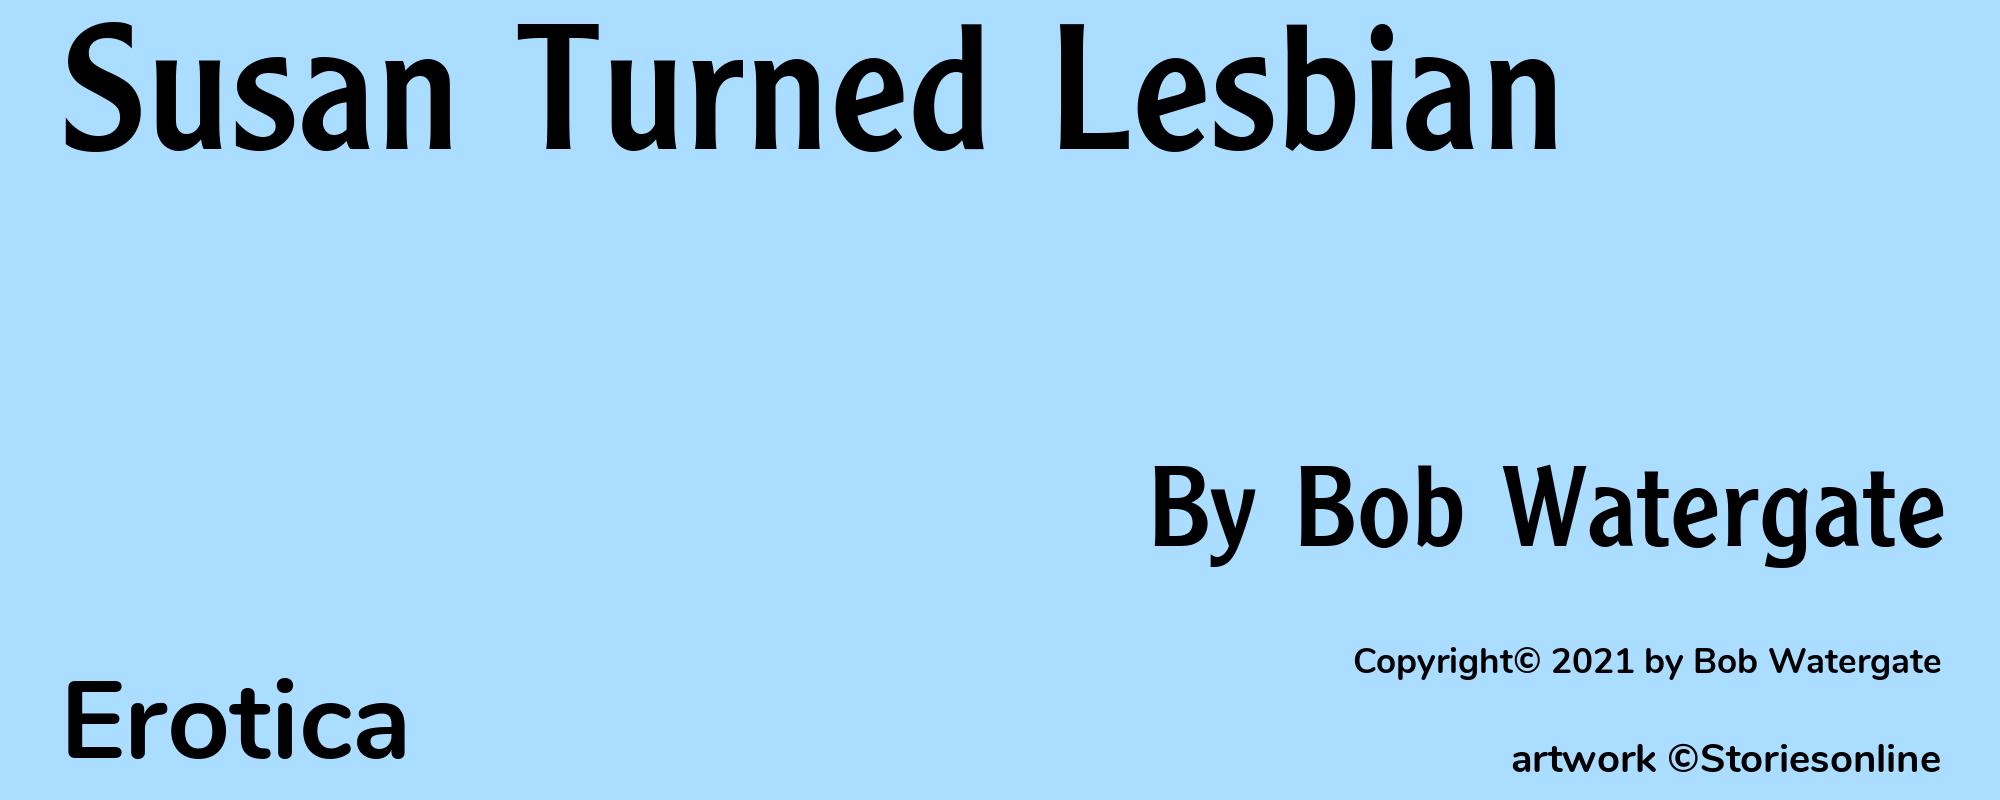 Susan Turned Lesbian - Cover